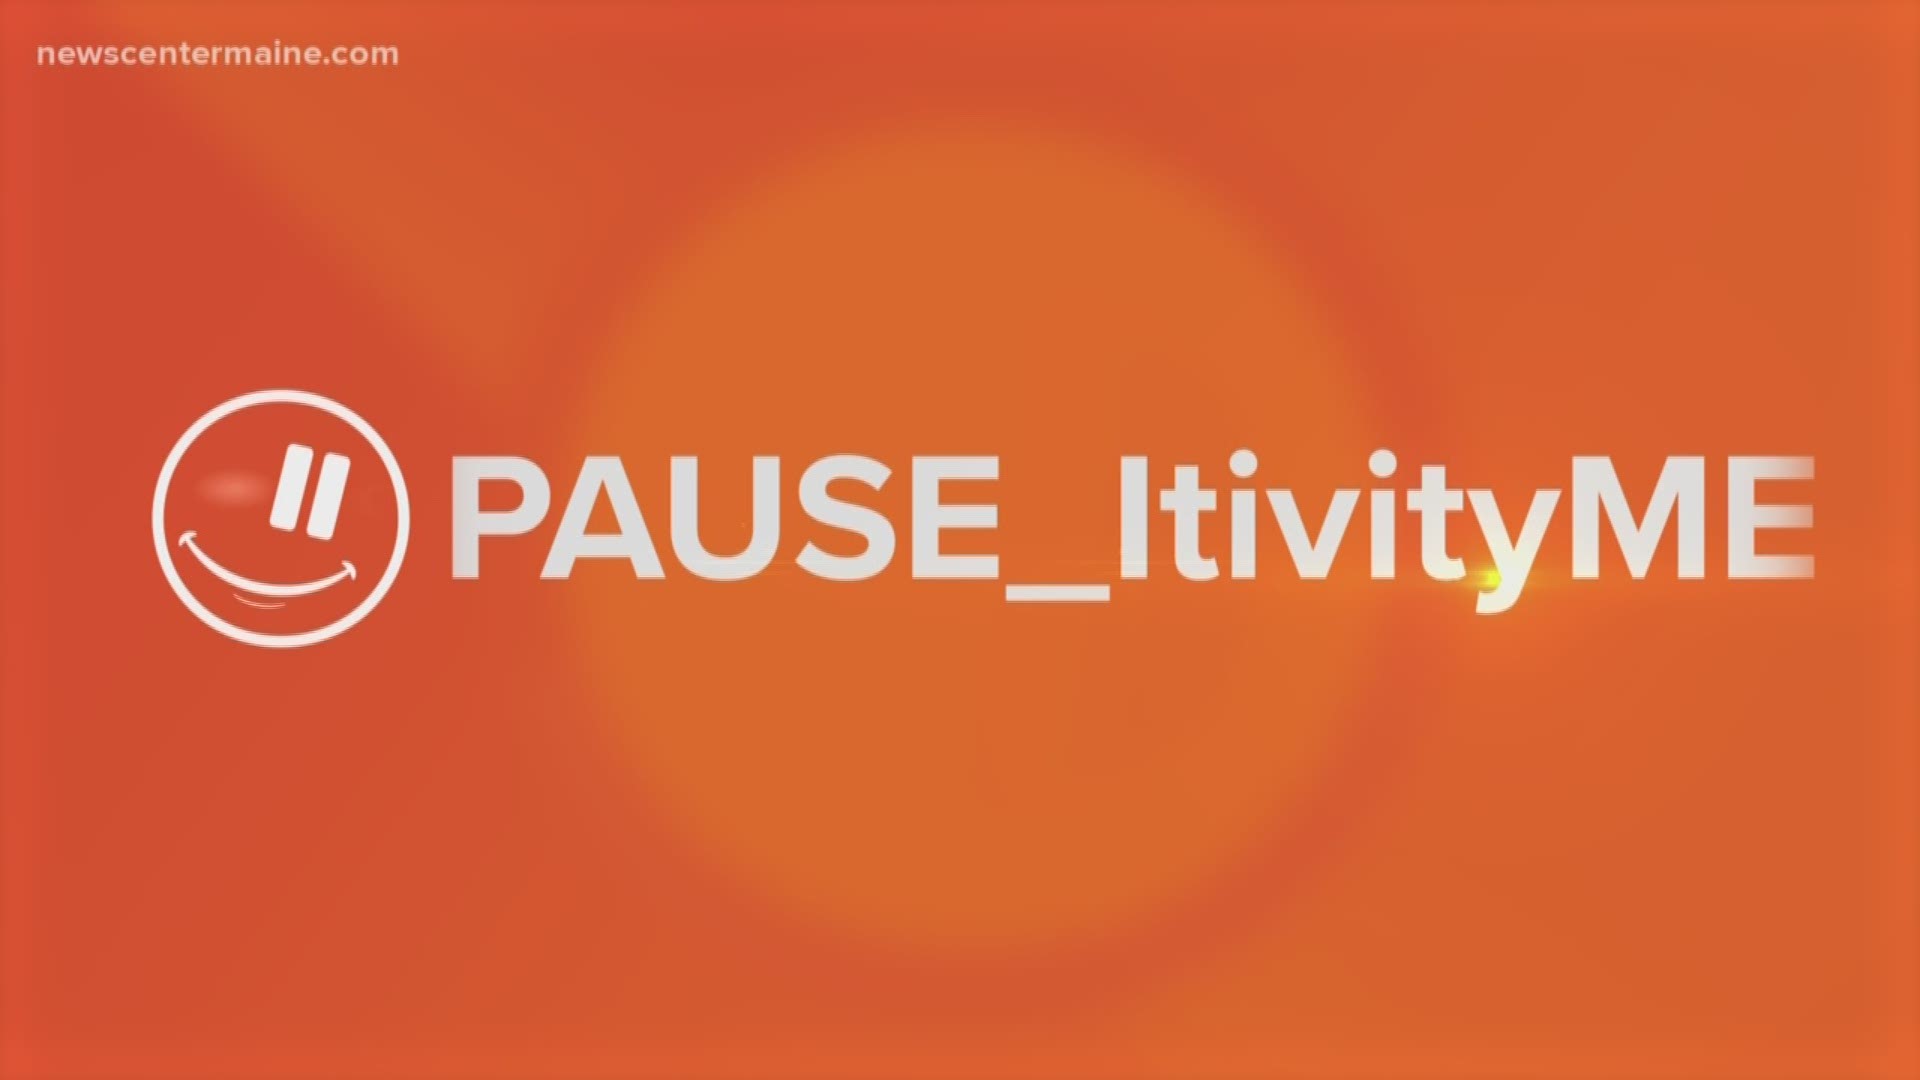 Pause_ItivityME segment from September 18. 